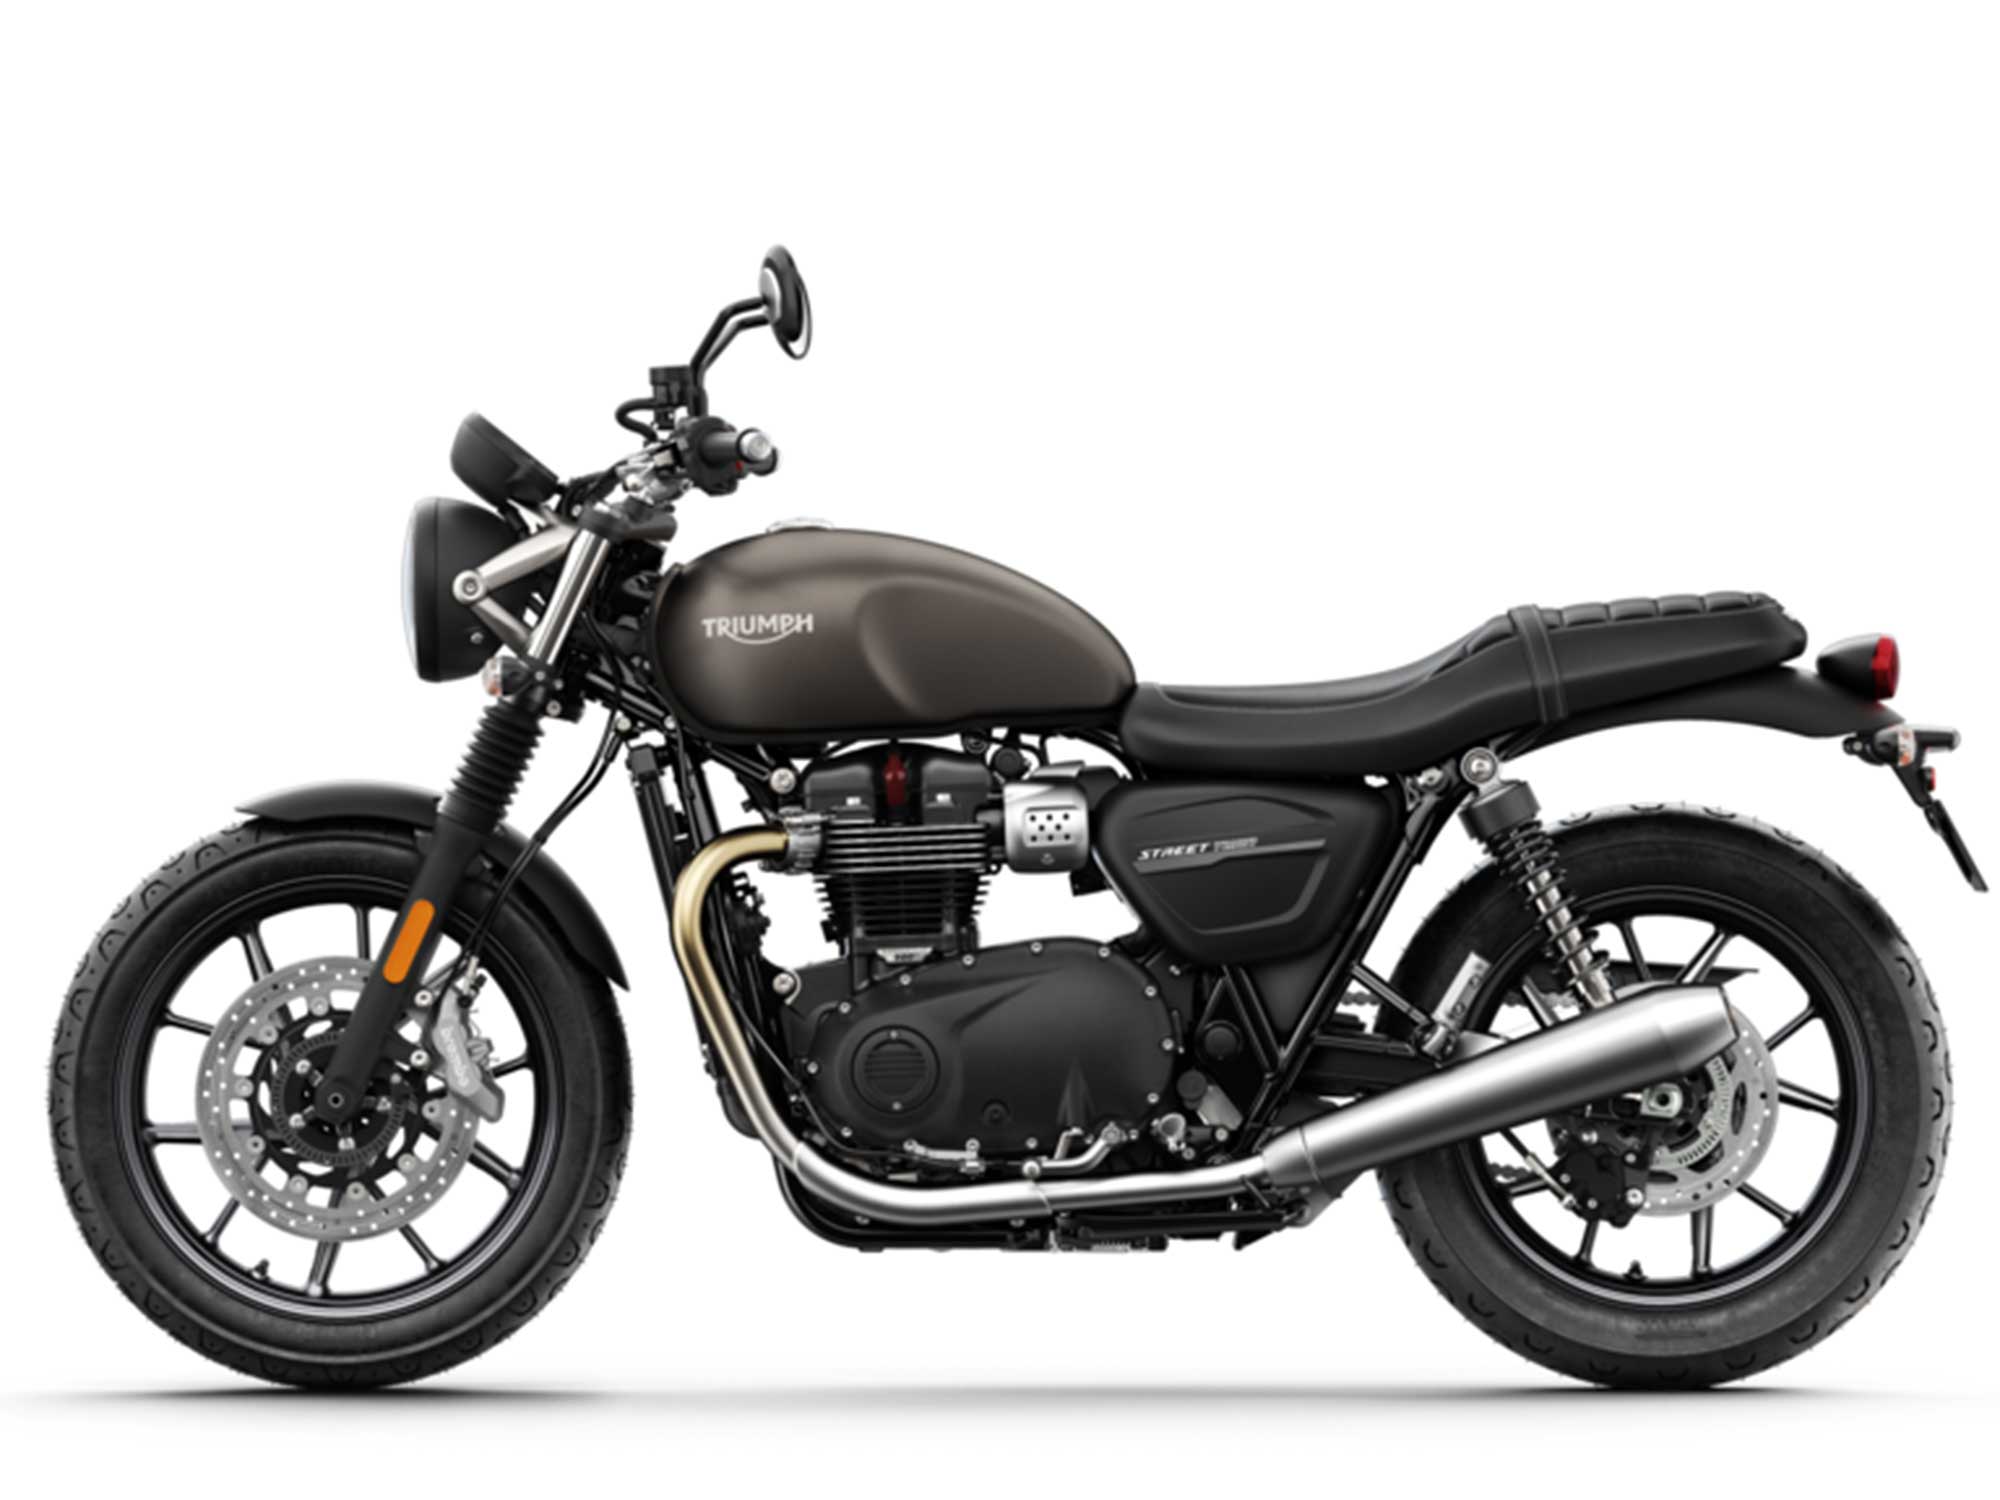 Triumph Bonneville Street Twin Price, Features, Specifications | lupon ...